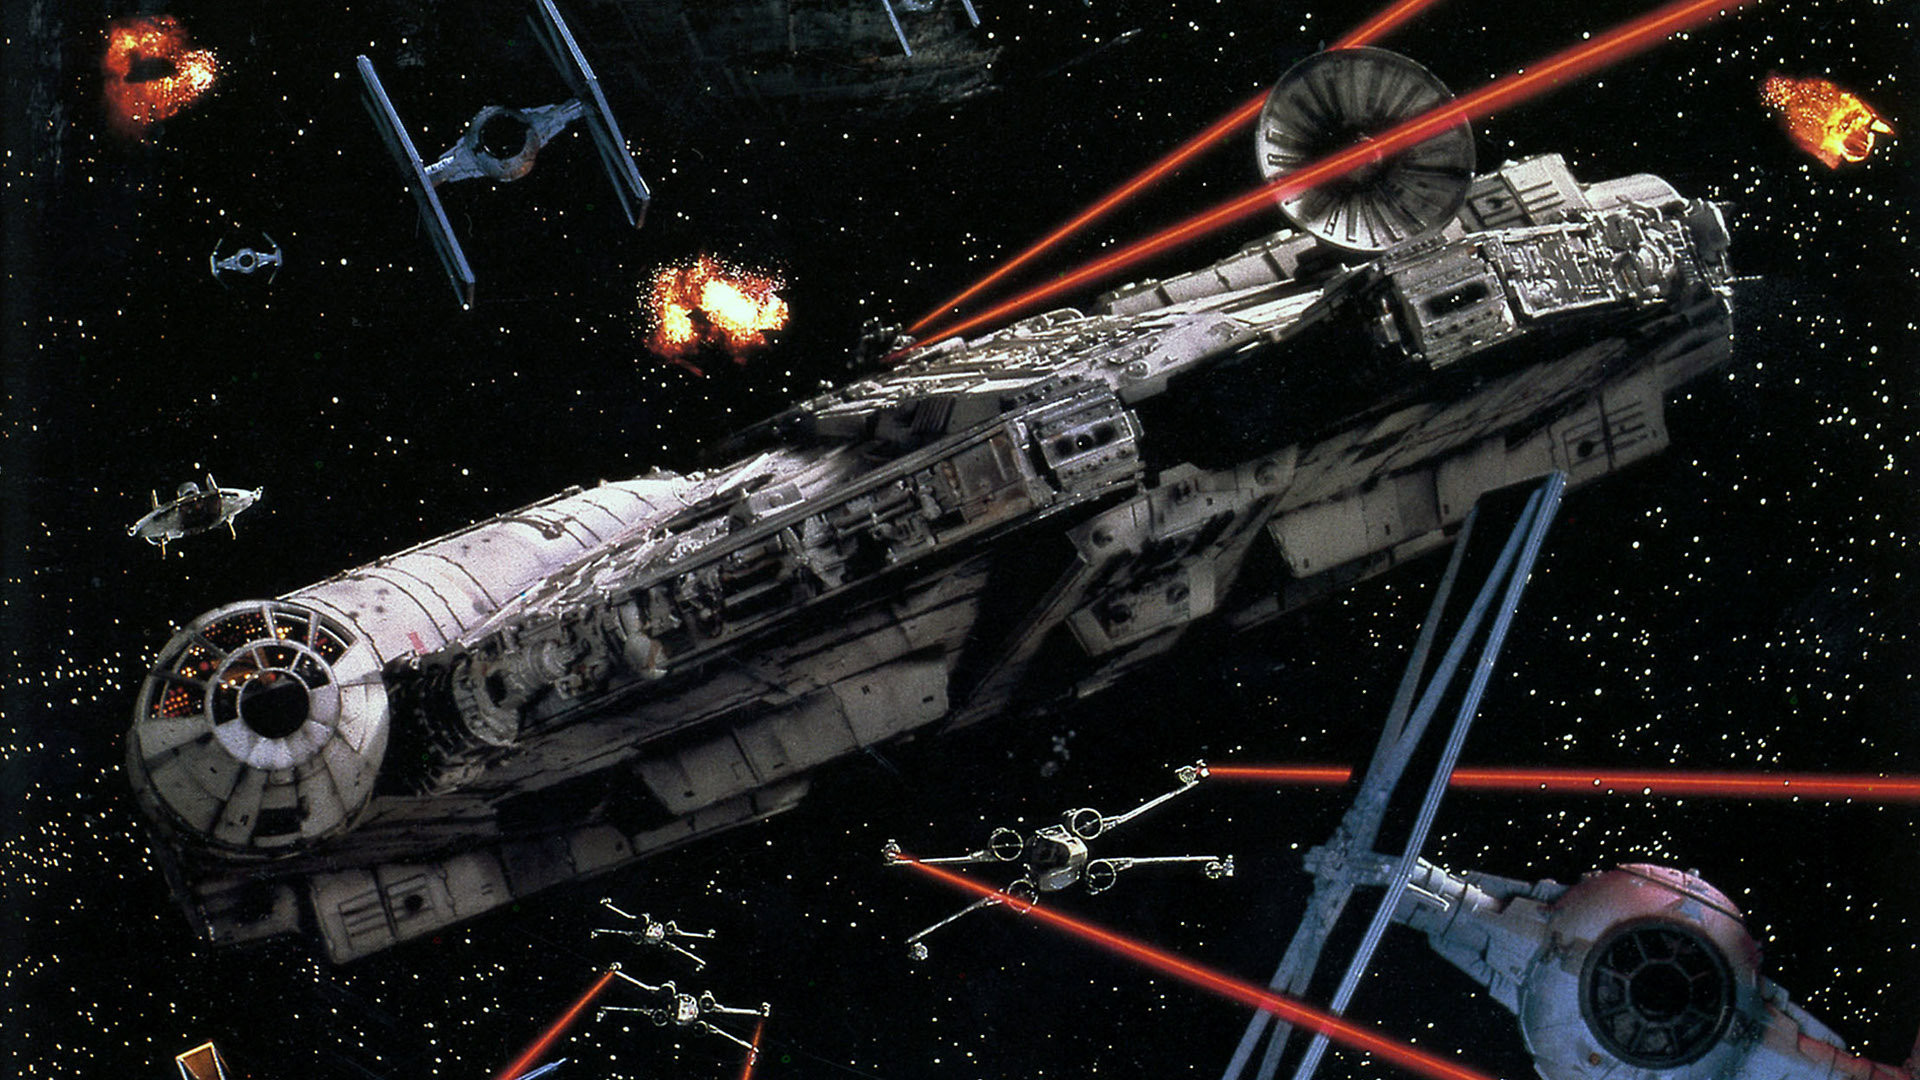 30+ Star Wars Episode VI: Return Of The Jedi HD Wallpapers and Backgrounds